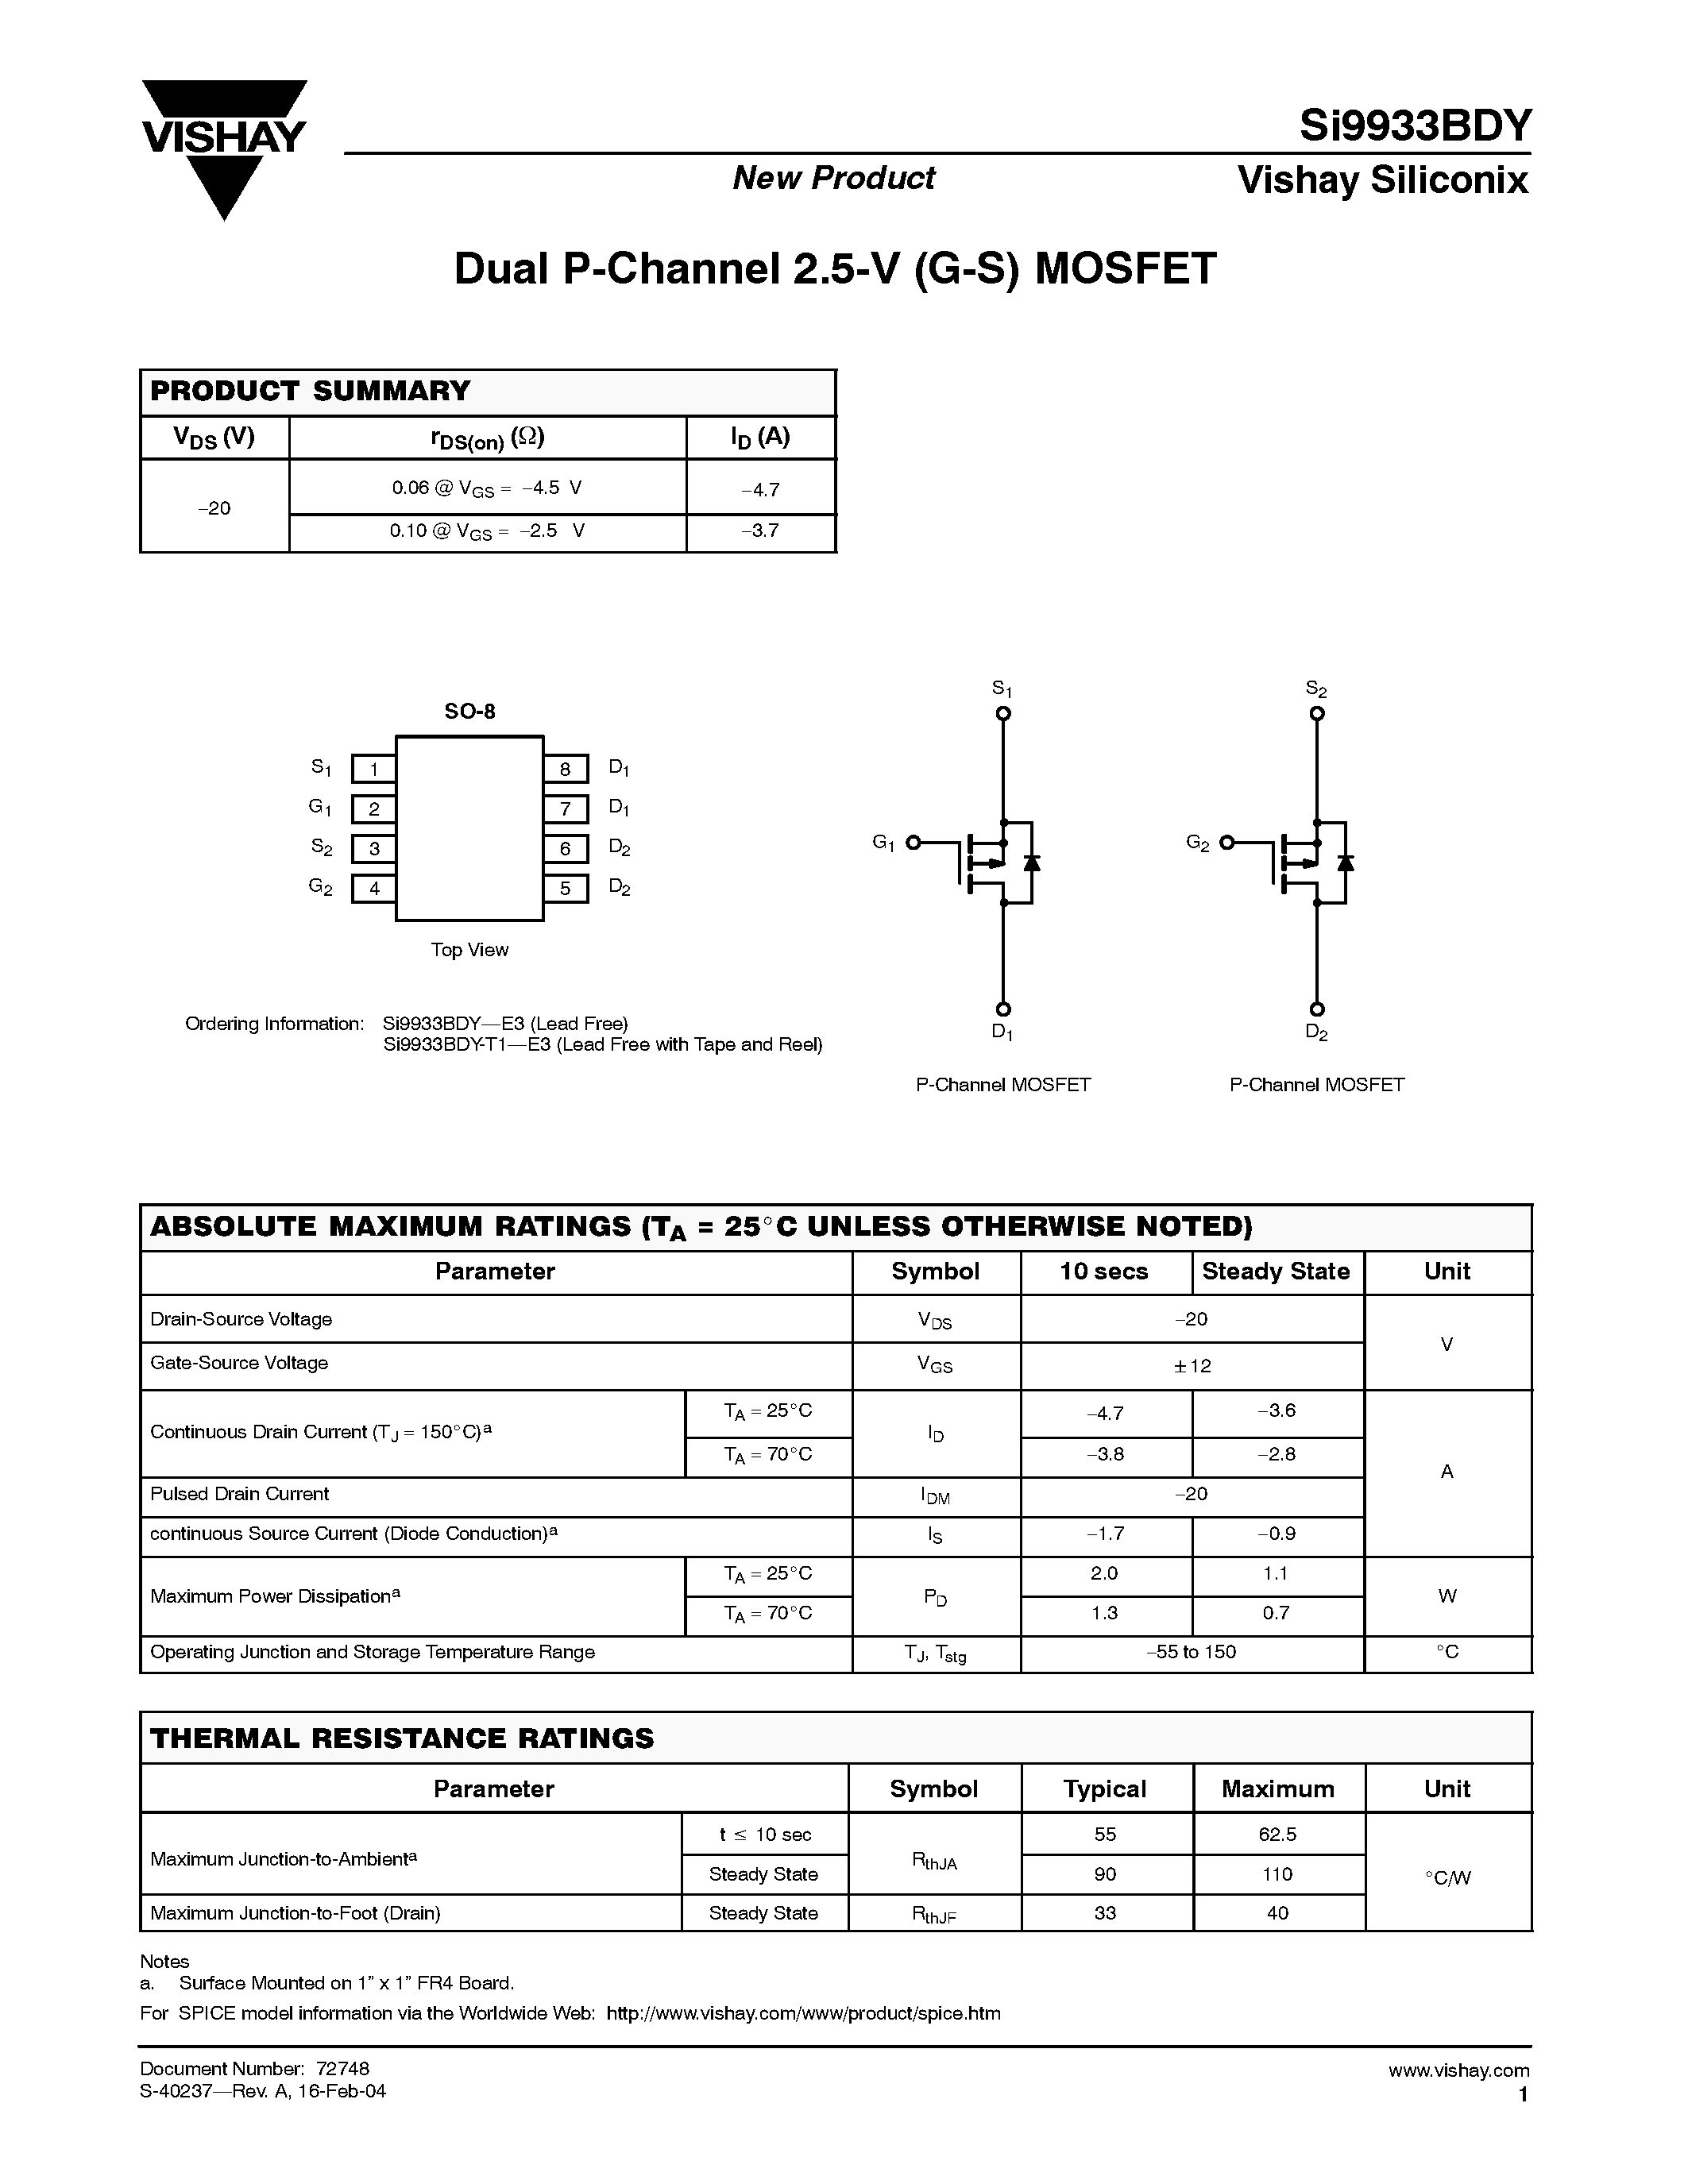 Даташит SI9933BDY-T1-E3 - Dual P-Channel 2.5-V (G-S) MOSFET страница 1